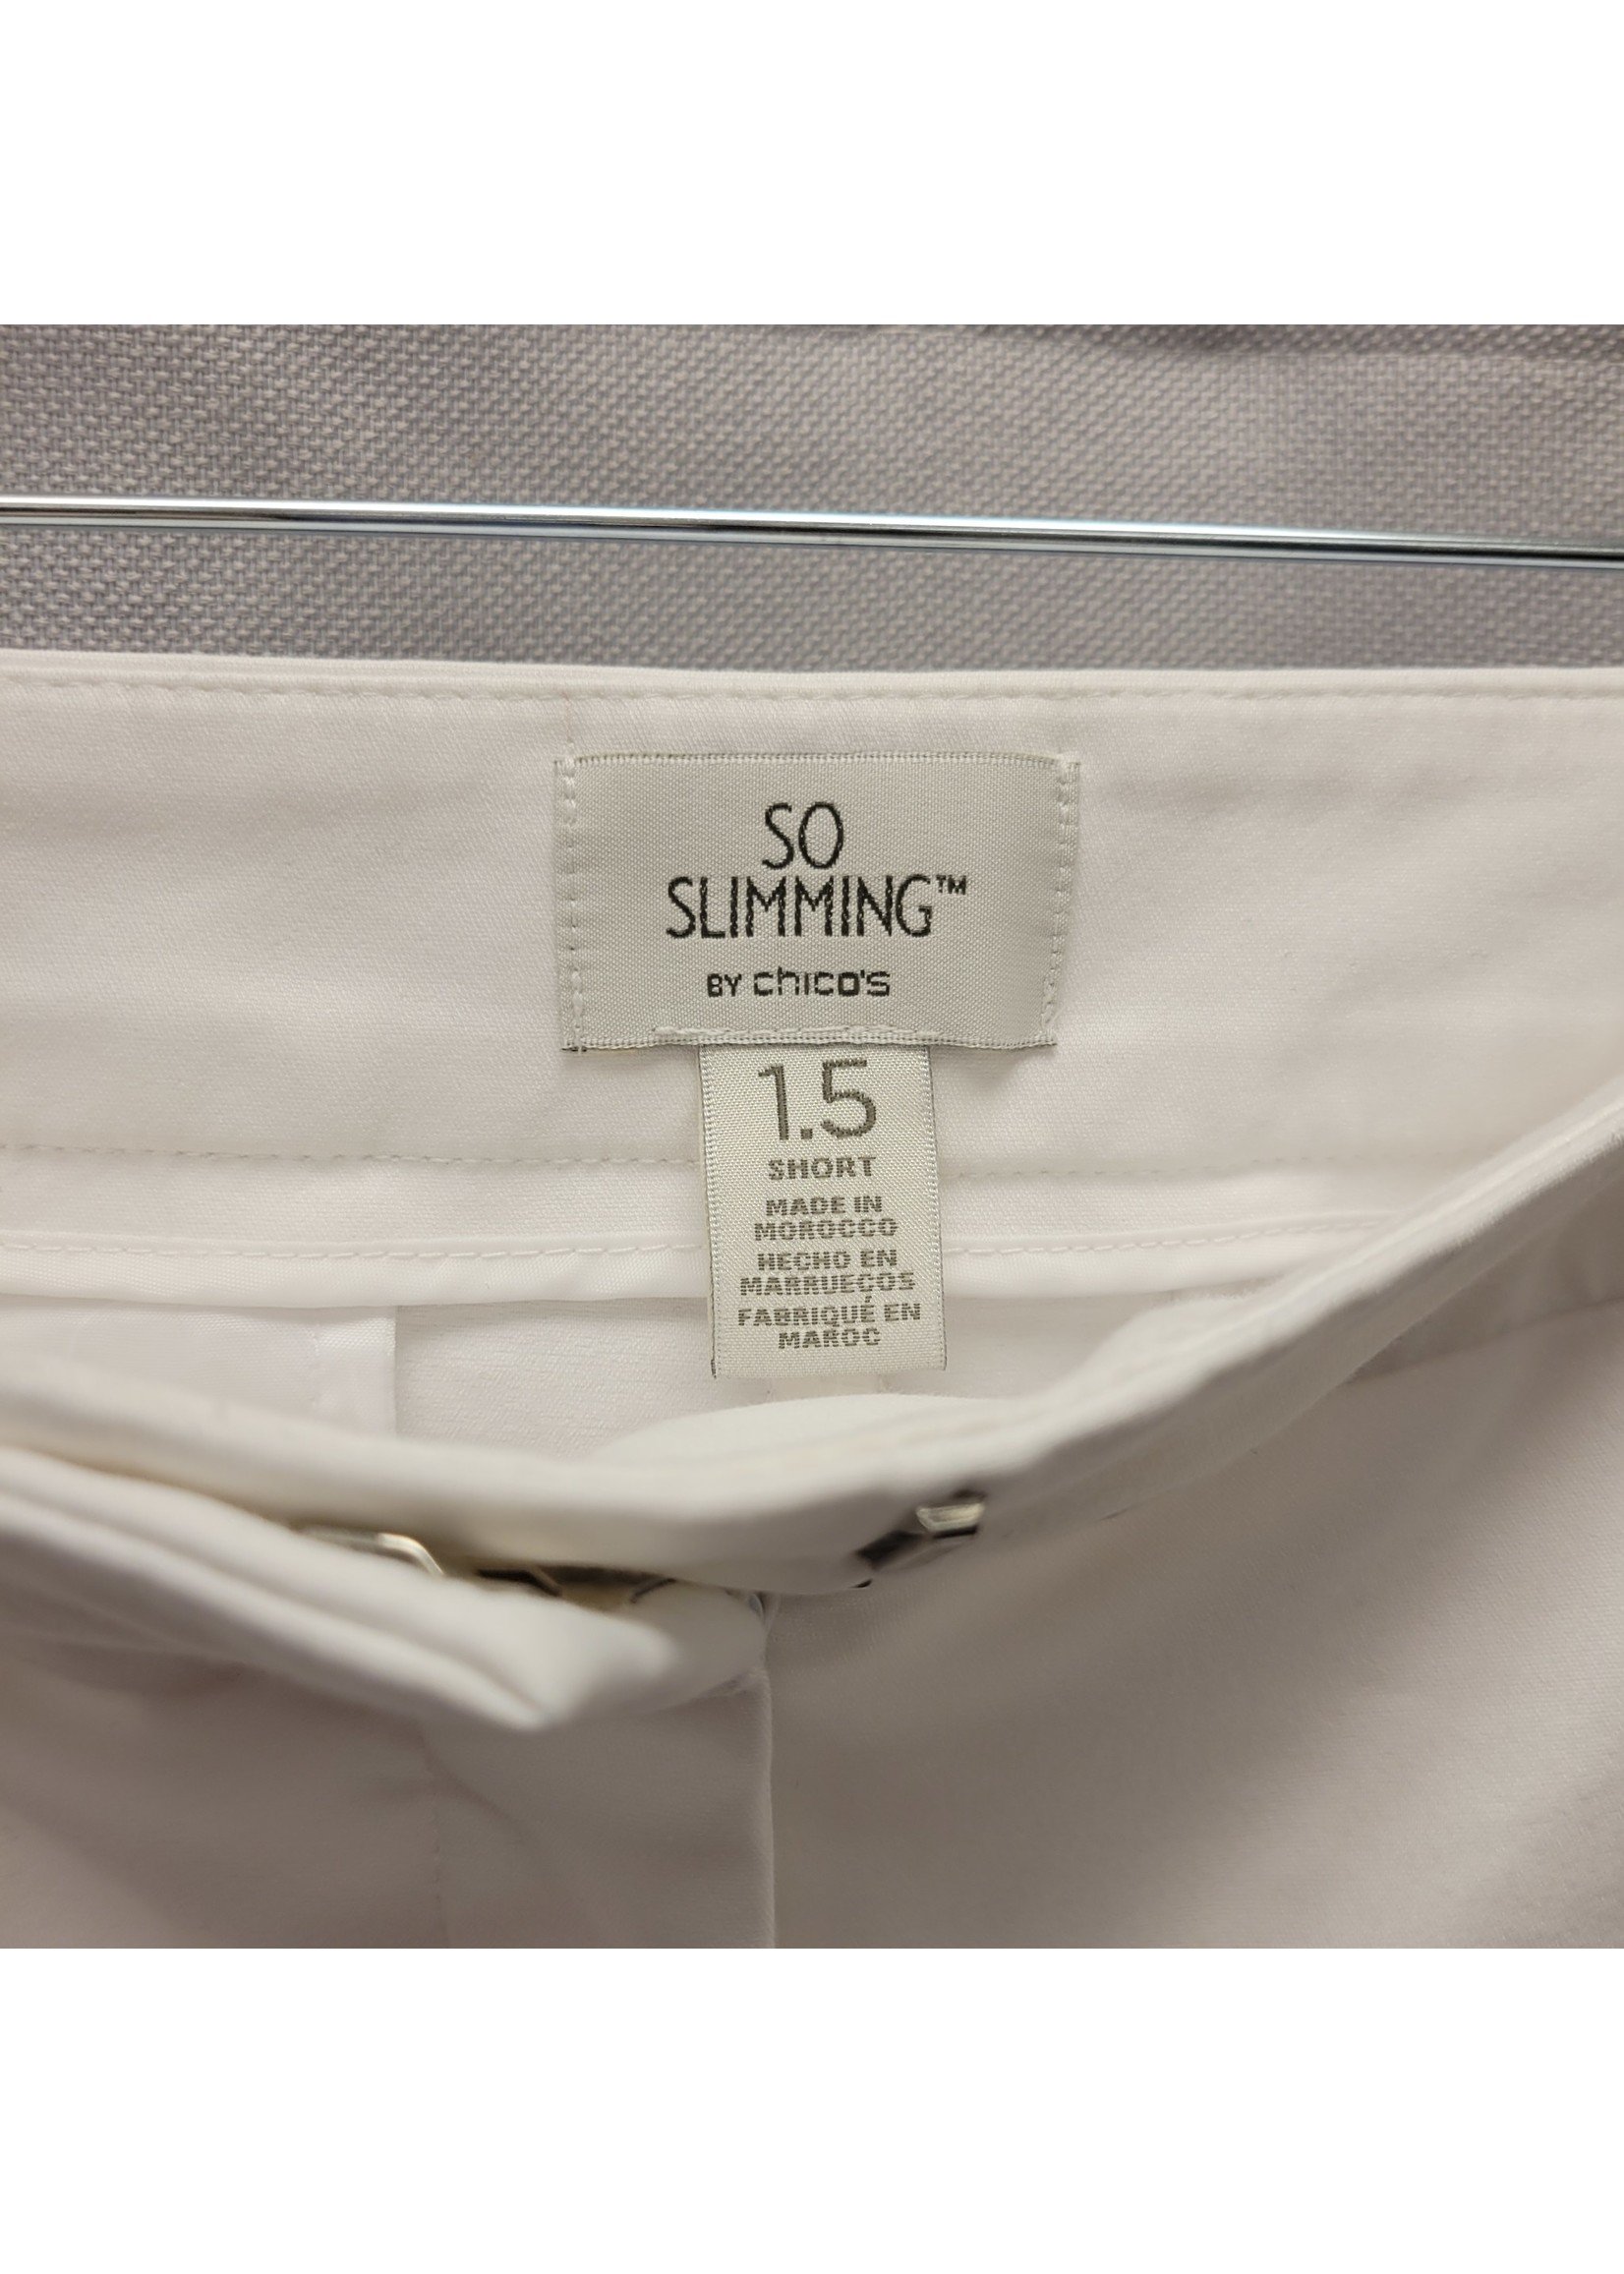 So Slimming Short Casual Pants (1.5) M/10 Pre-owned - Doubletake